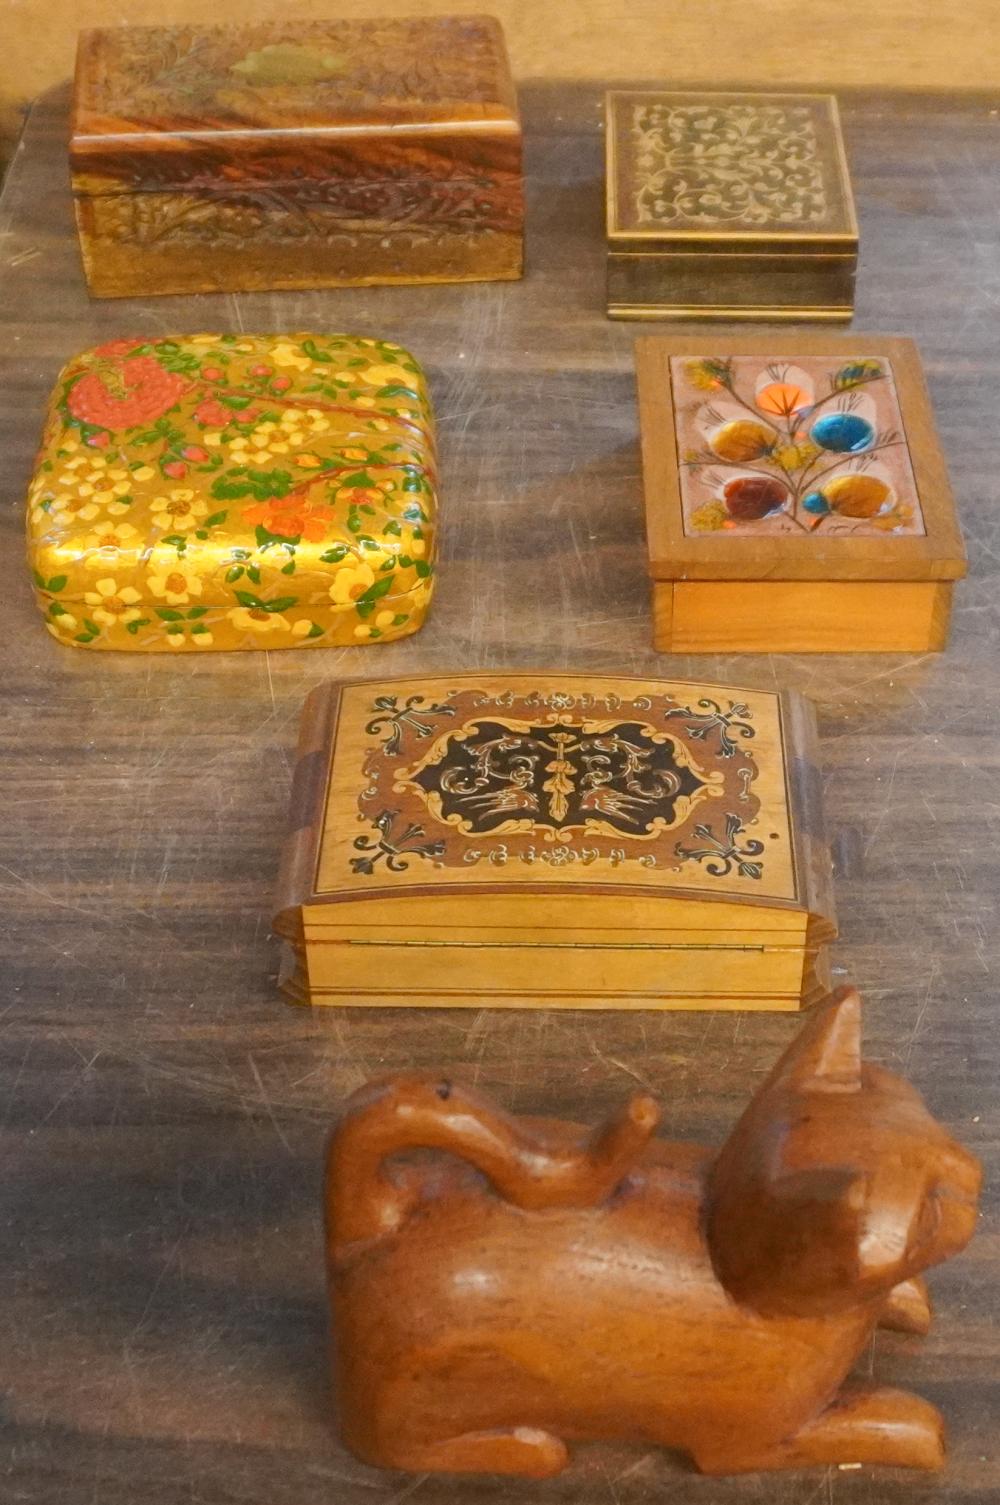 GROUP OF WOOD BOXES AND CATGroup